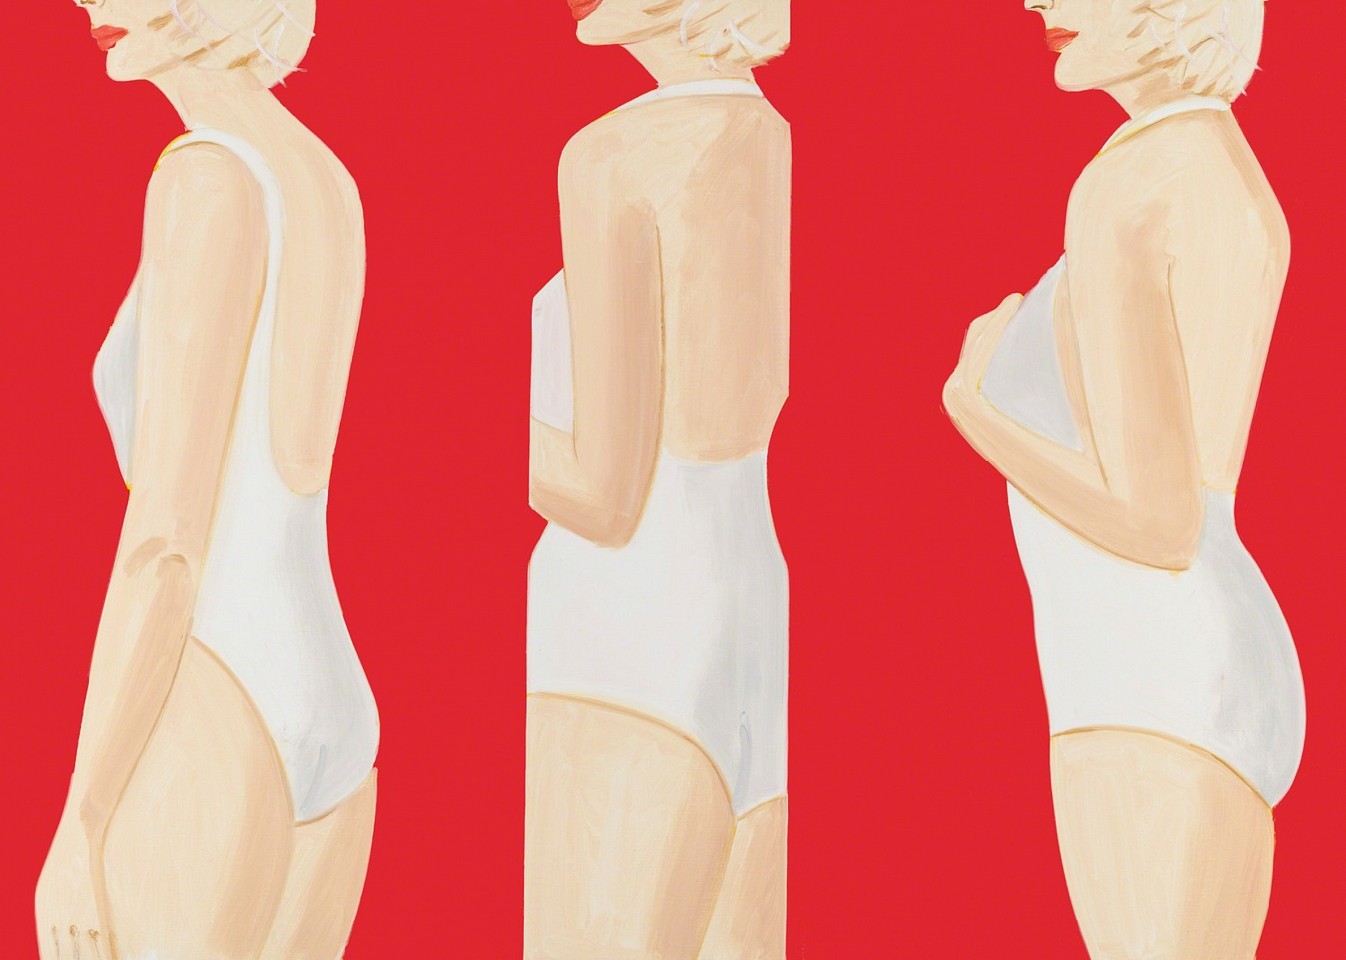 Alex Katz, Coca Cola Girls 5; edition 38/60, 2019
20-color silkscreen on Saunders Waterford High White HP 425 gsm fine art paper, 40 x 56 inches (paper) / 44.5 x 60 inches (framed) / [+ $1,350 frame]
KATZ00069